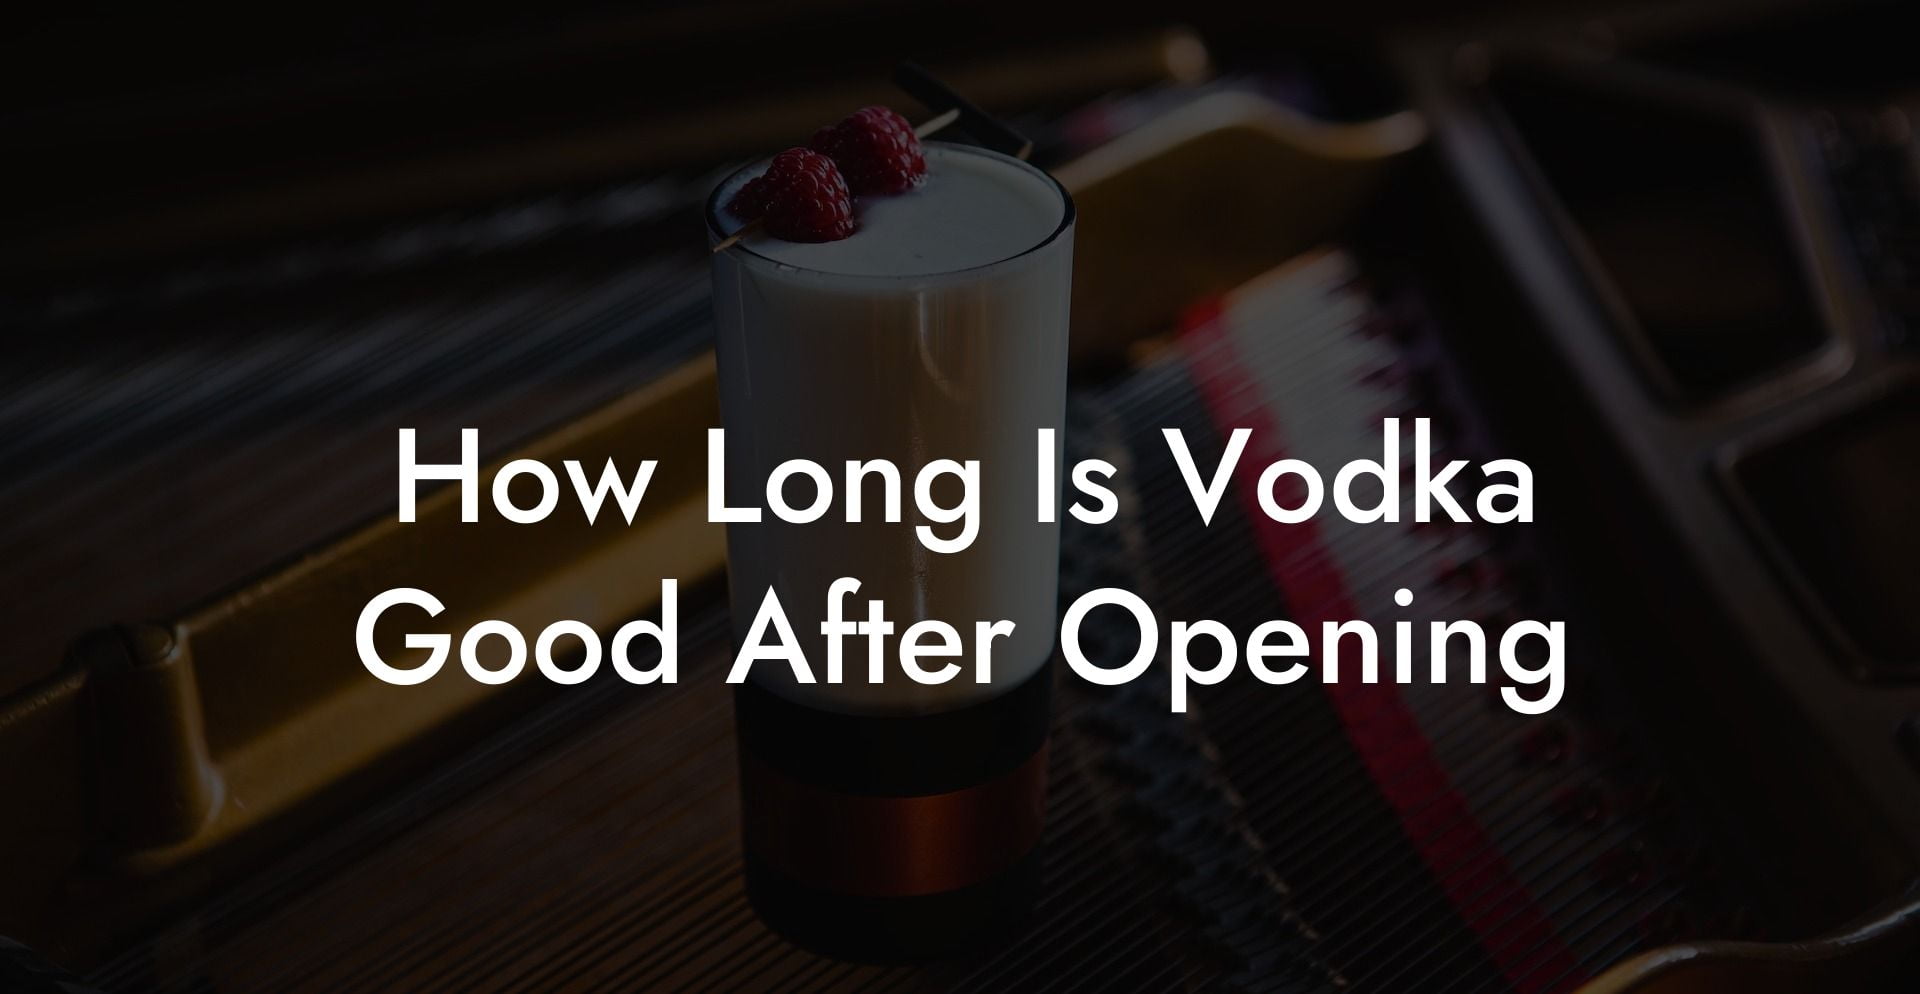 How Long Is Vodka Good After Opening